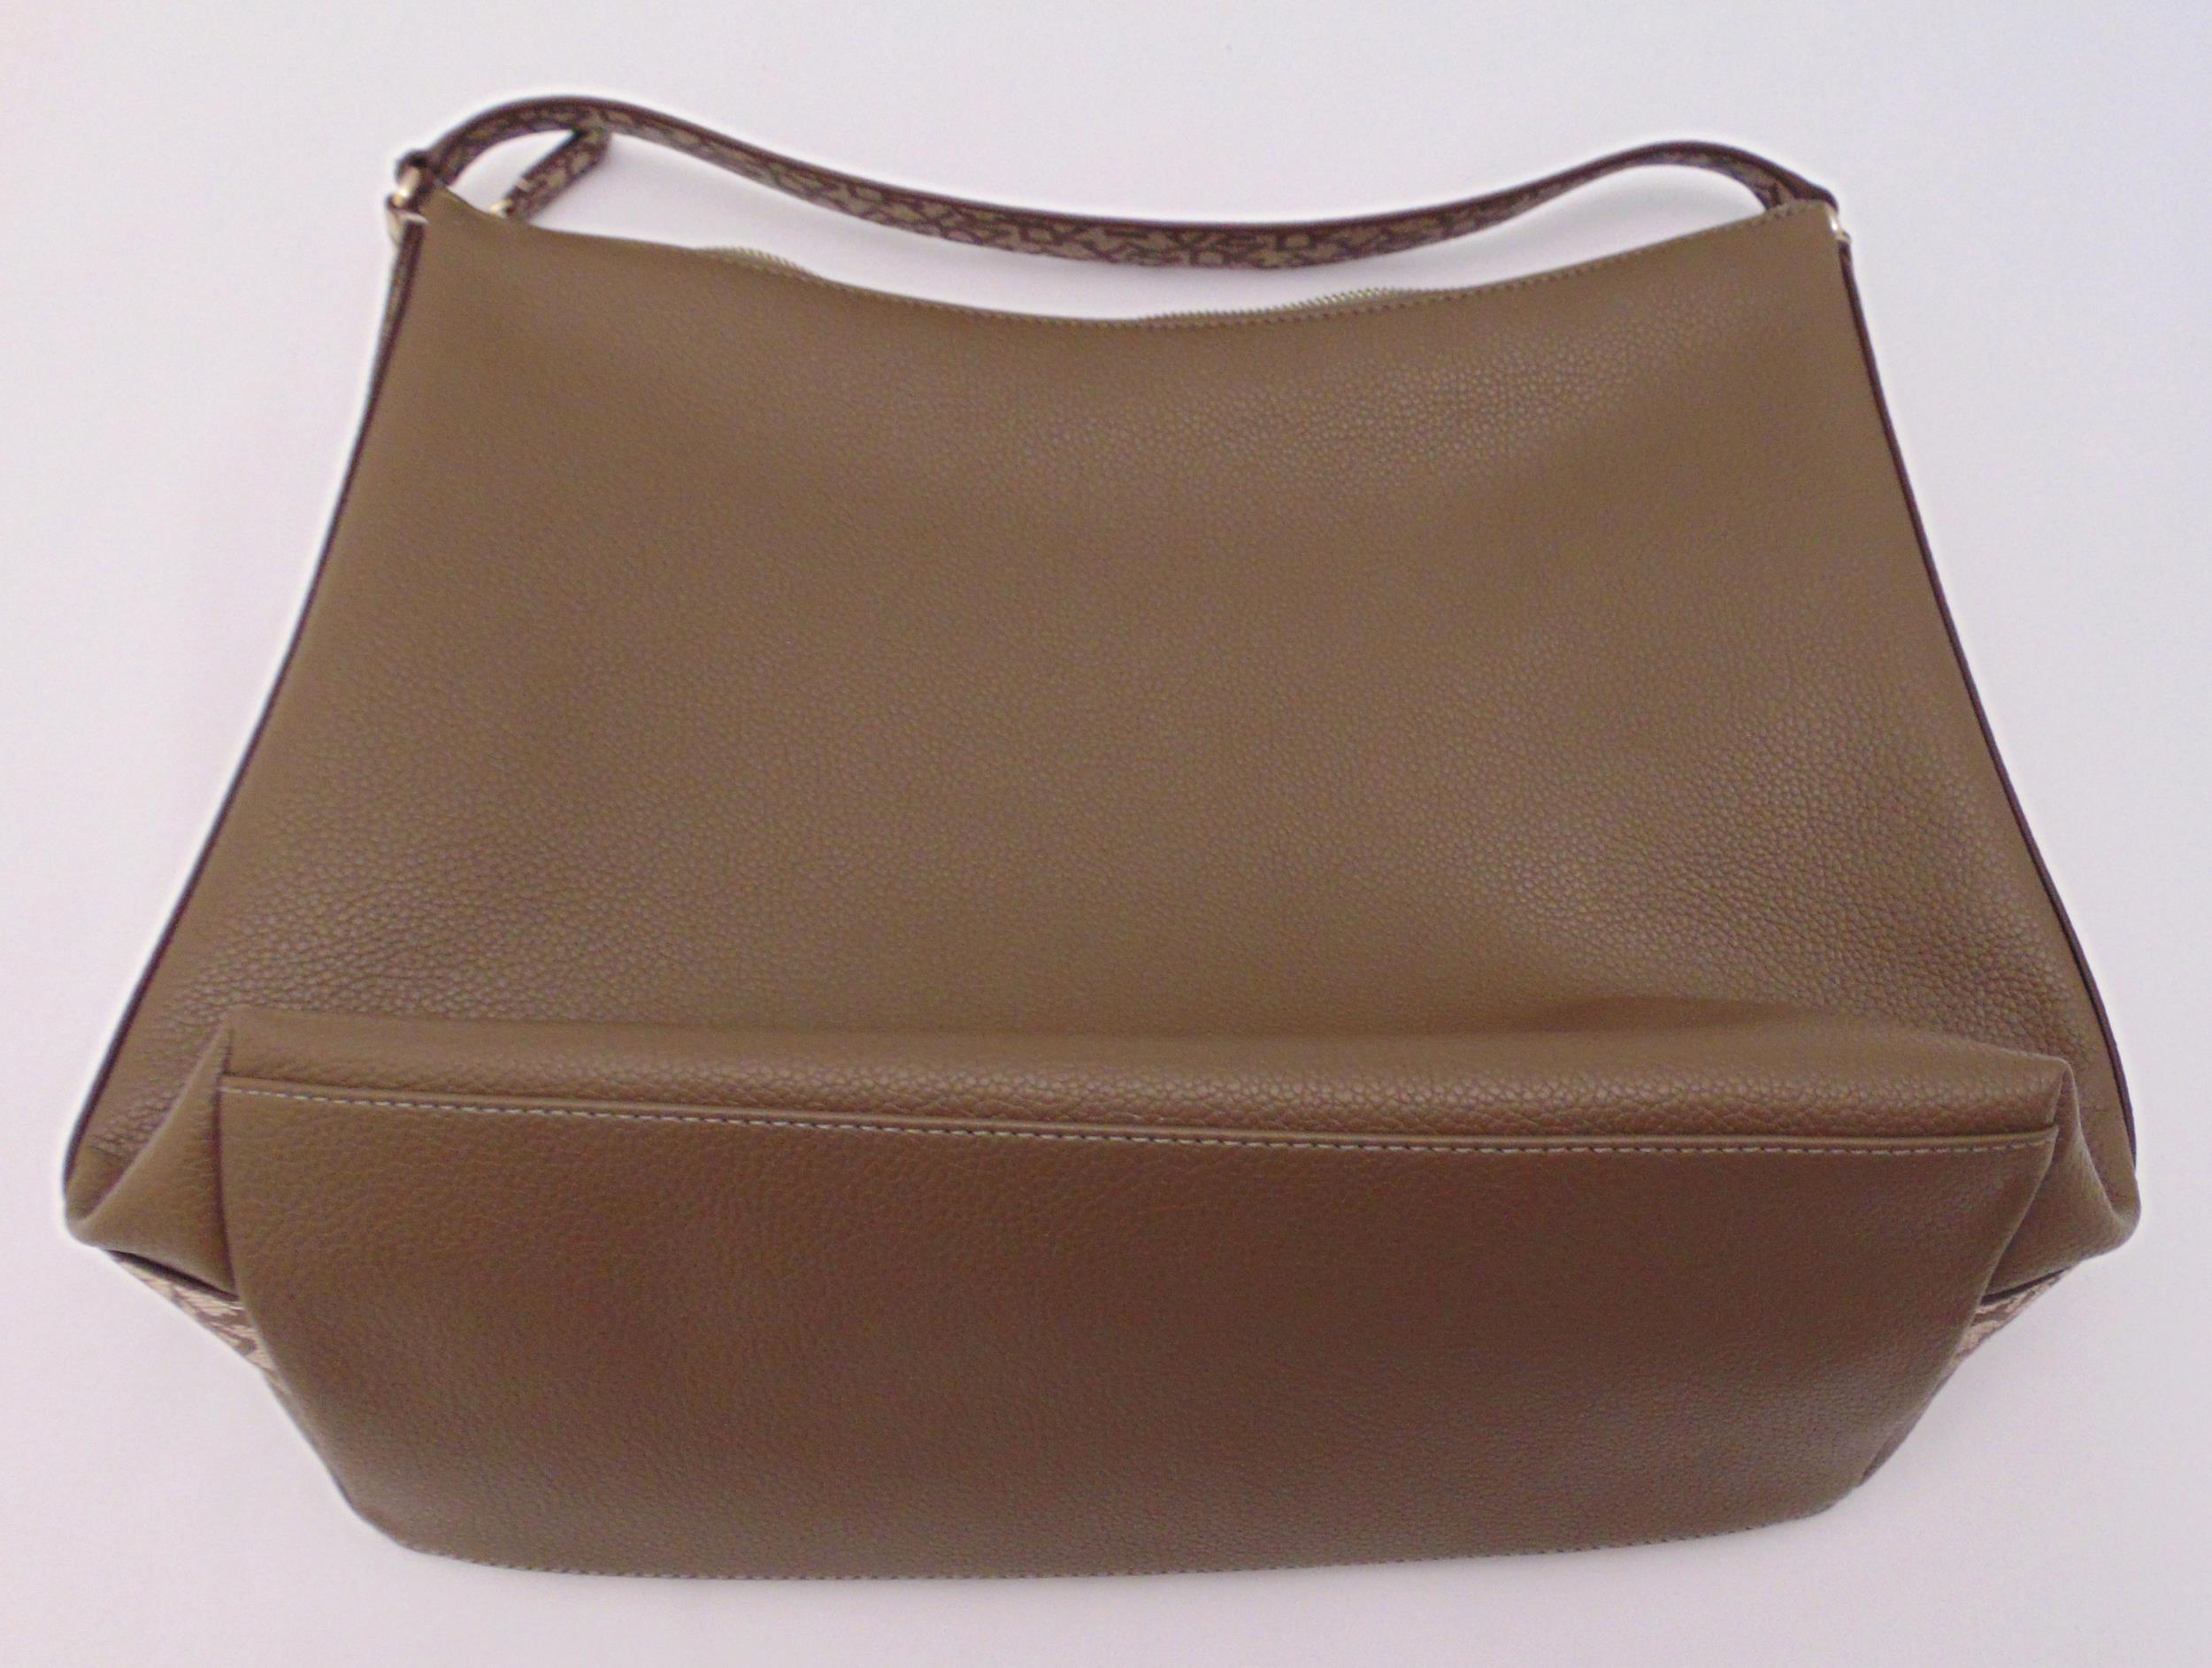 DKNY ladies taupe leather tote bag - Image 2 of 3